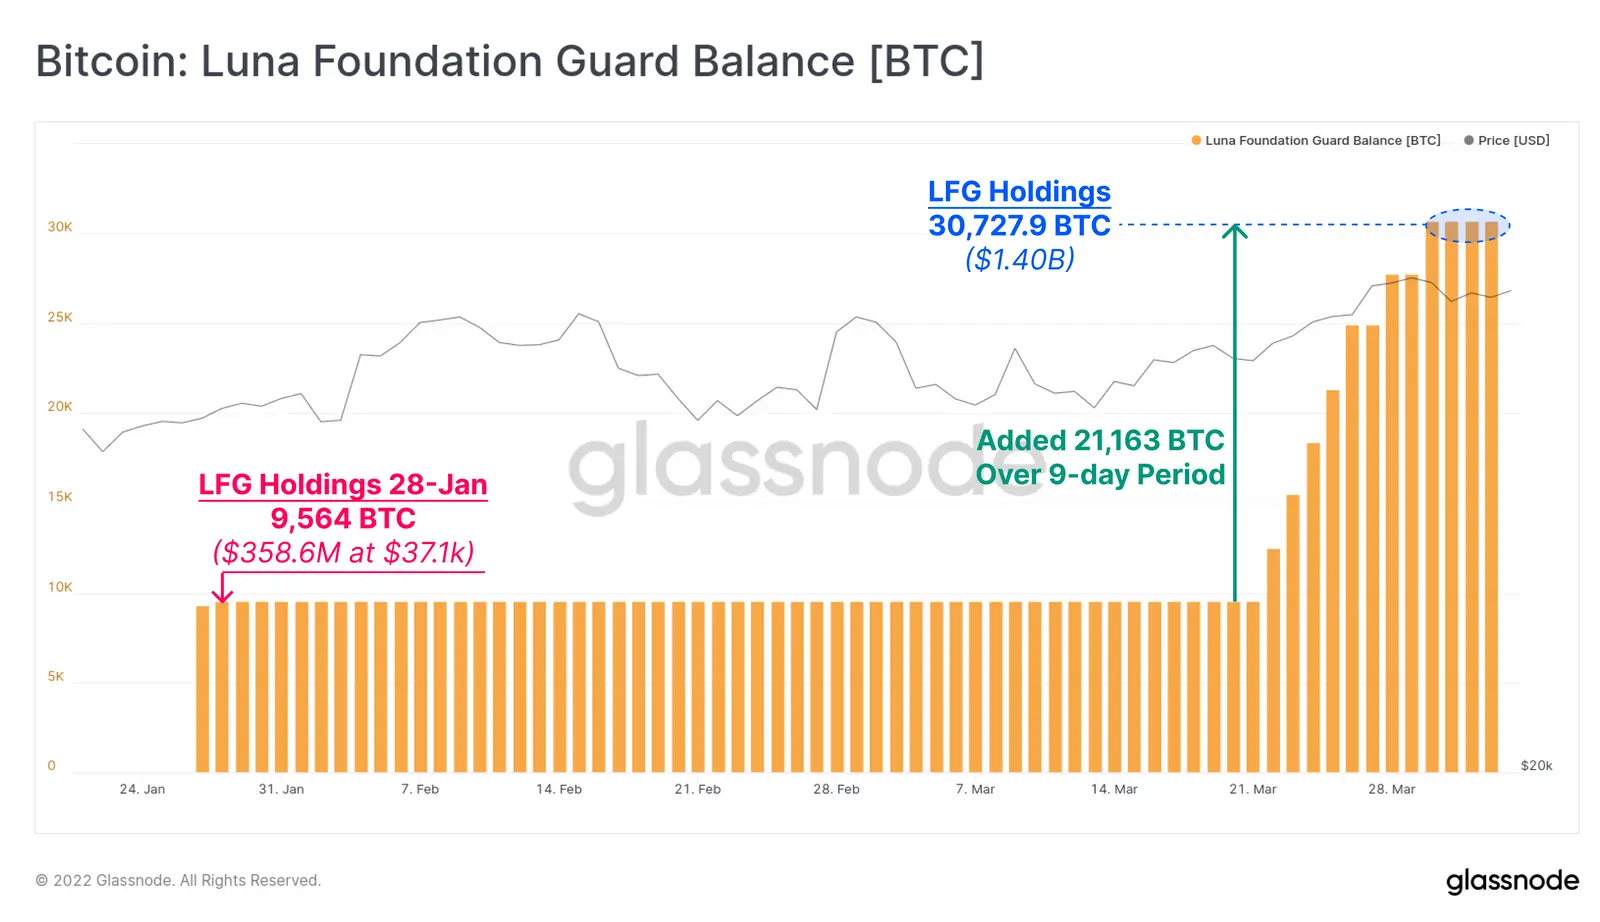 Bitcoin On-Chain Analyse: Glassnode Report KW 14/2022